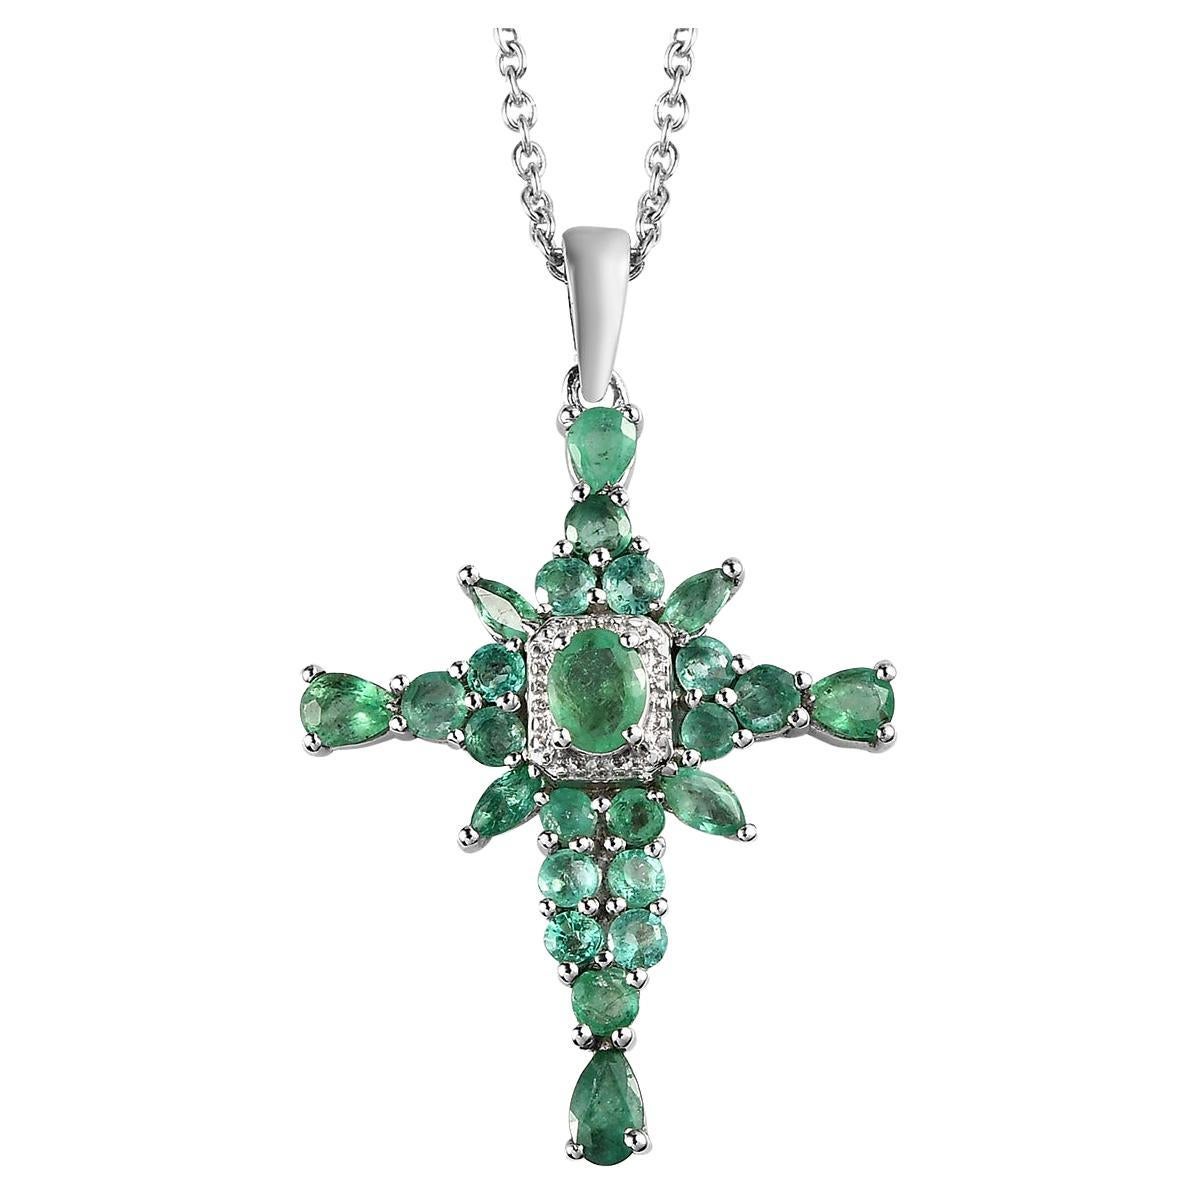 2.39 Ct Zambian Emerald Cross Pendant Necklace 925 Sterling Silver Necklace 